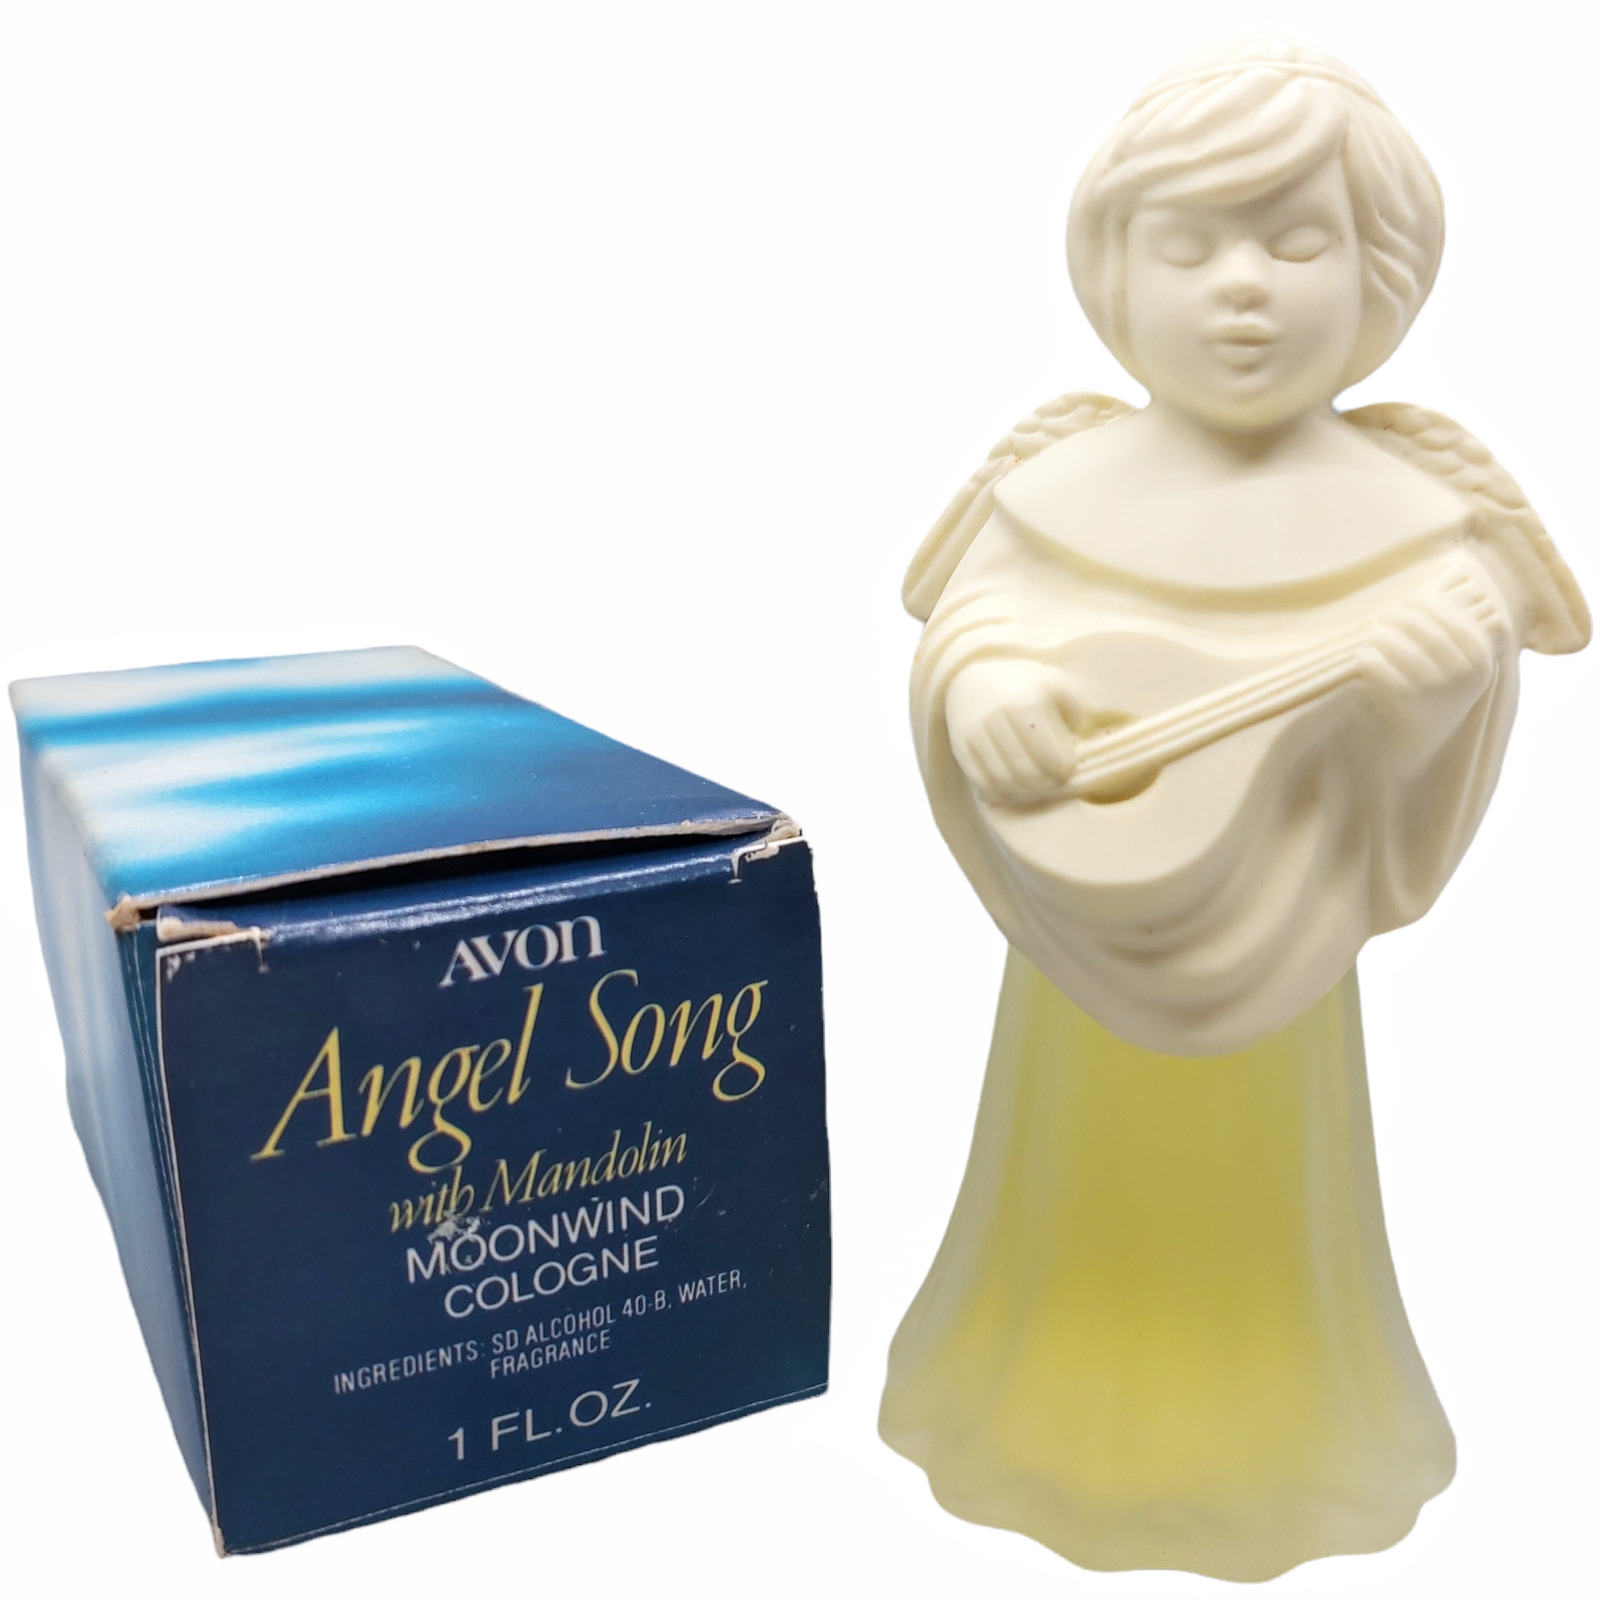 Vintage Collectible AVON Angel Song with Mandolin Moonwind Cologne 1 FL OZ NOS